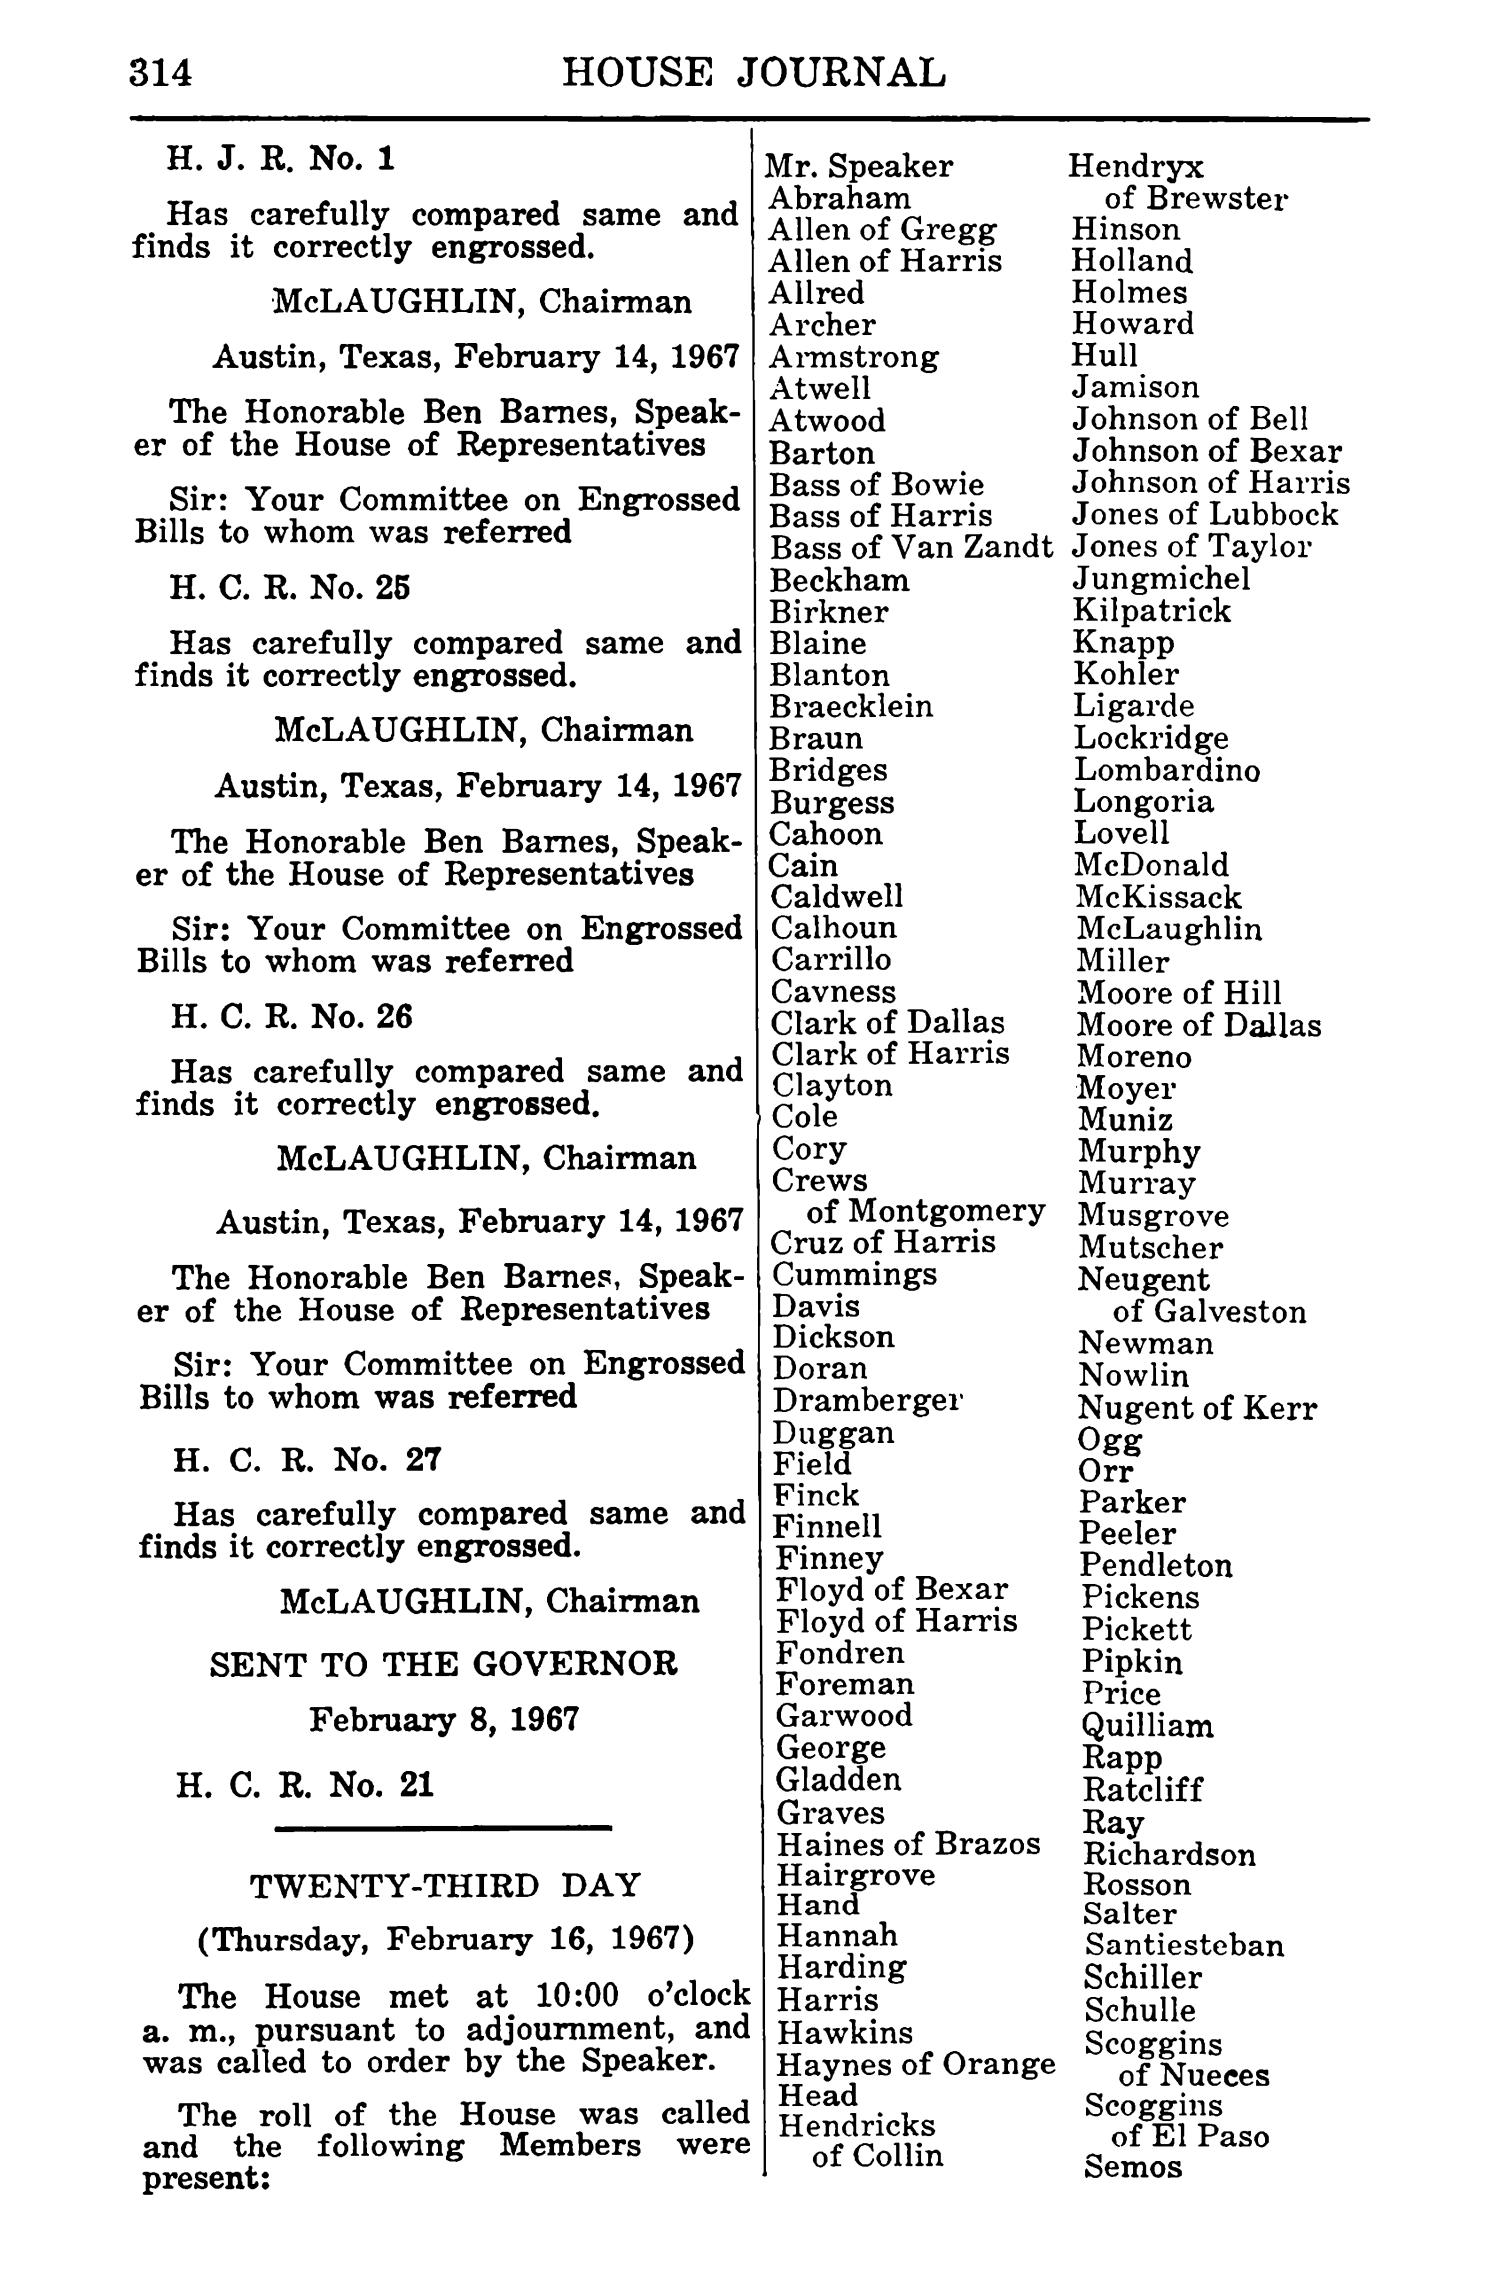 Journal of the House of Representatives of the Regular Session of the Sixtieth Legislature of the State of Texas, Volume 1
                                                
                                                    314
                                                